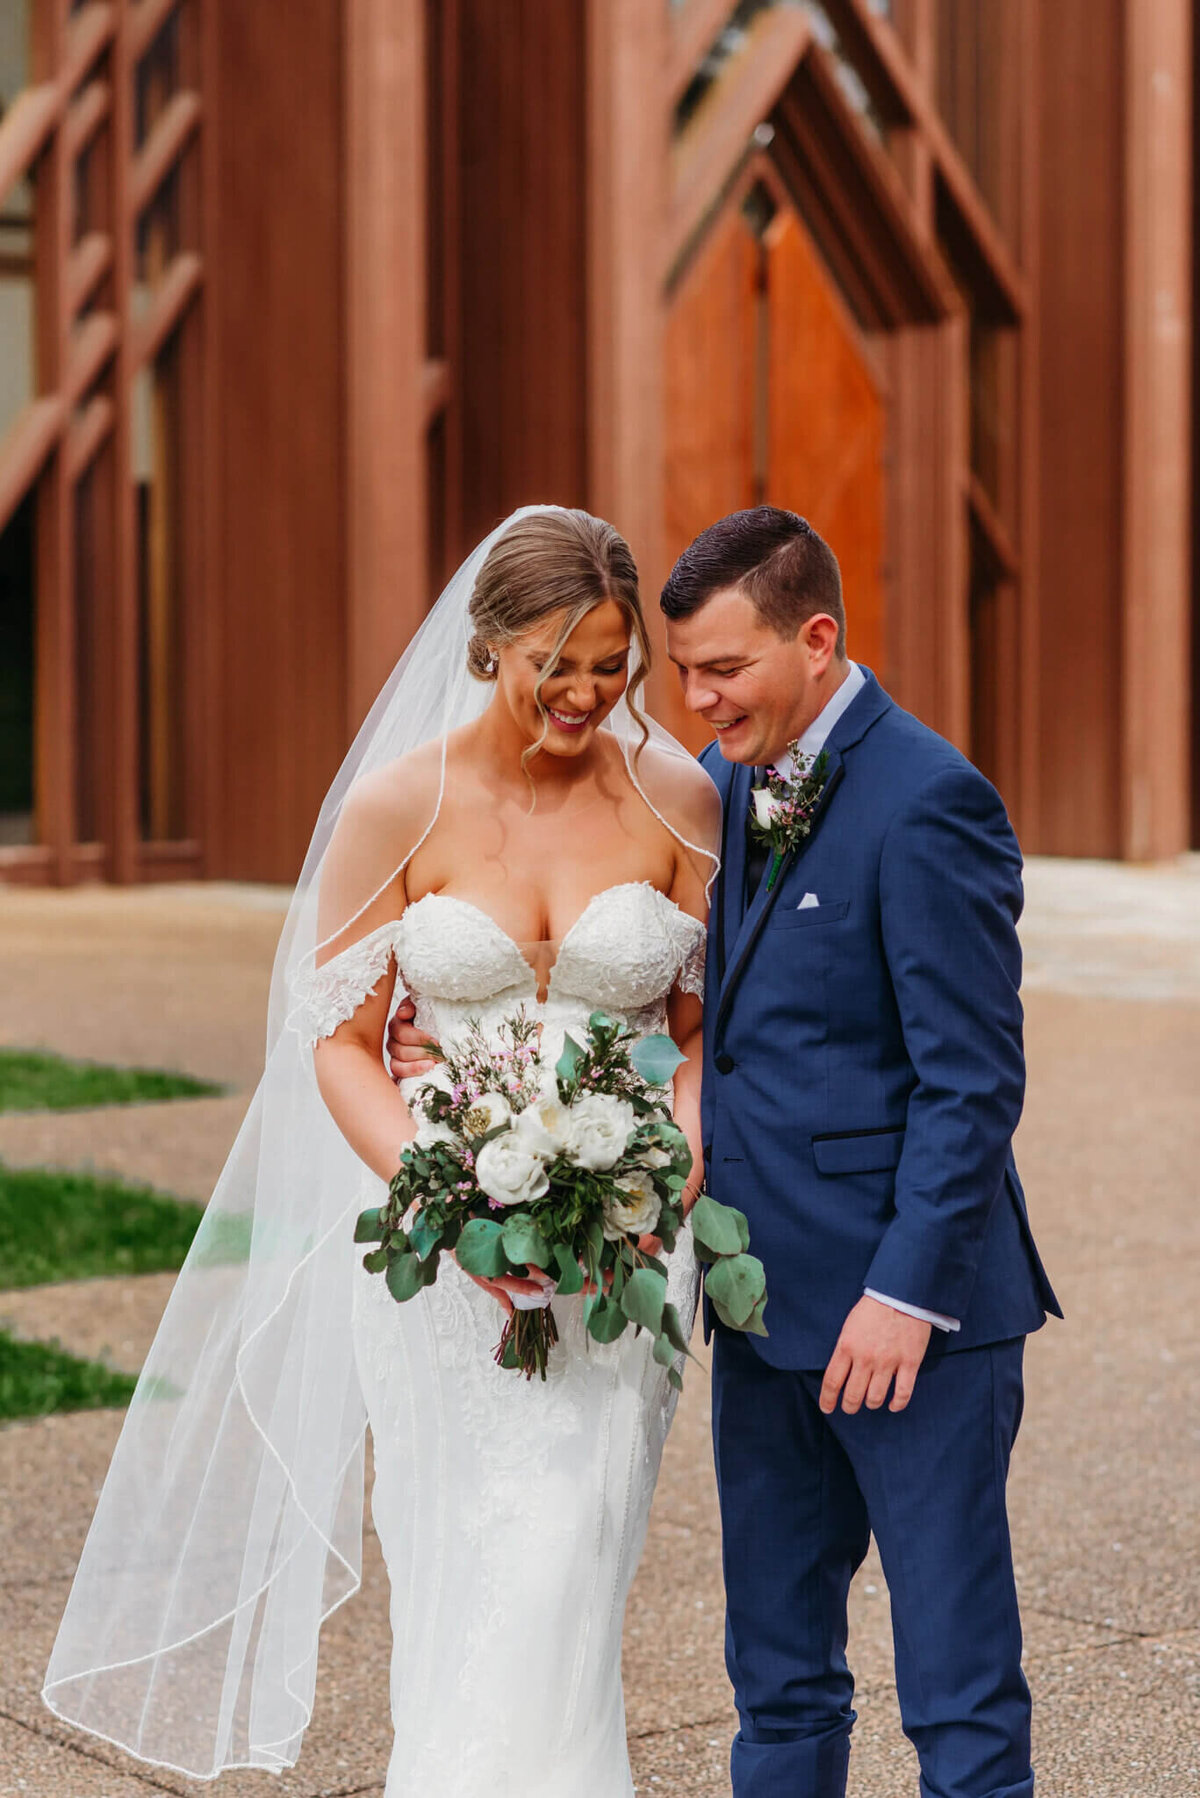 Photo of a bride and groom laughing while standing side-by-side in front of a wooden wedding chapel